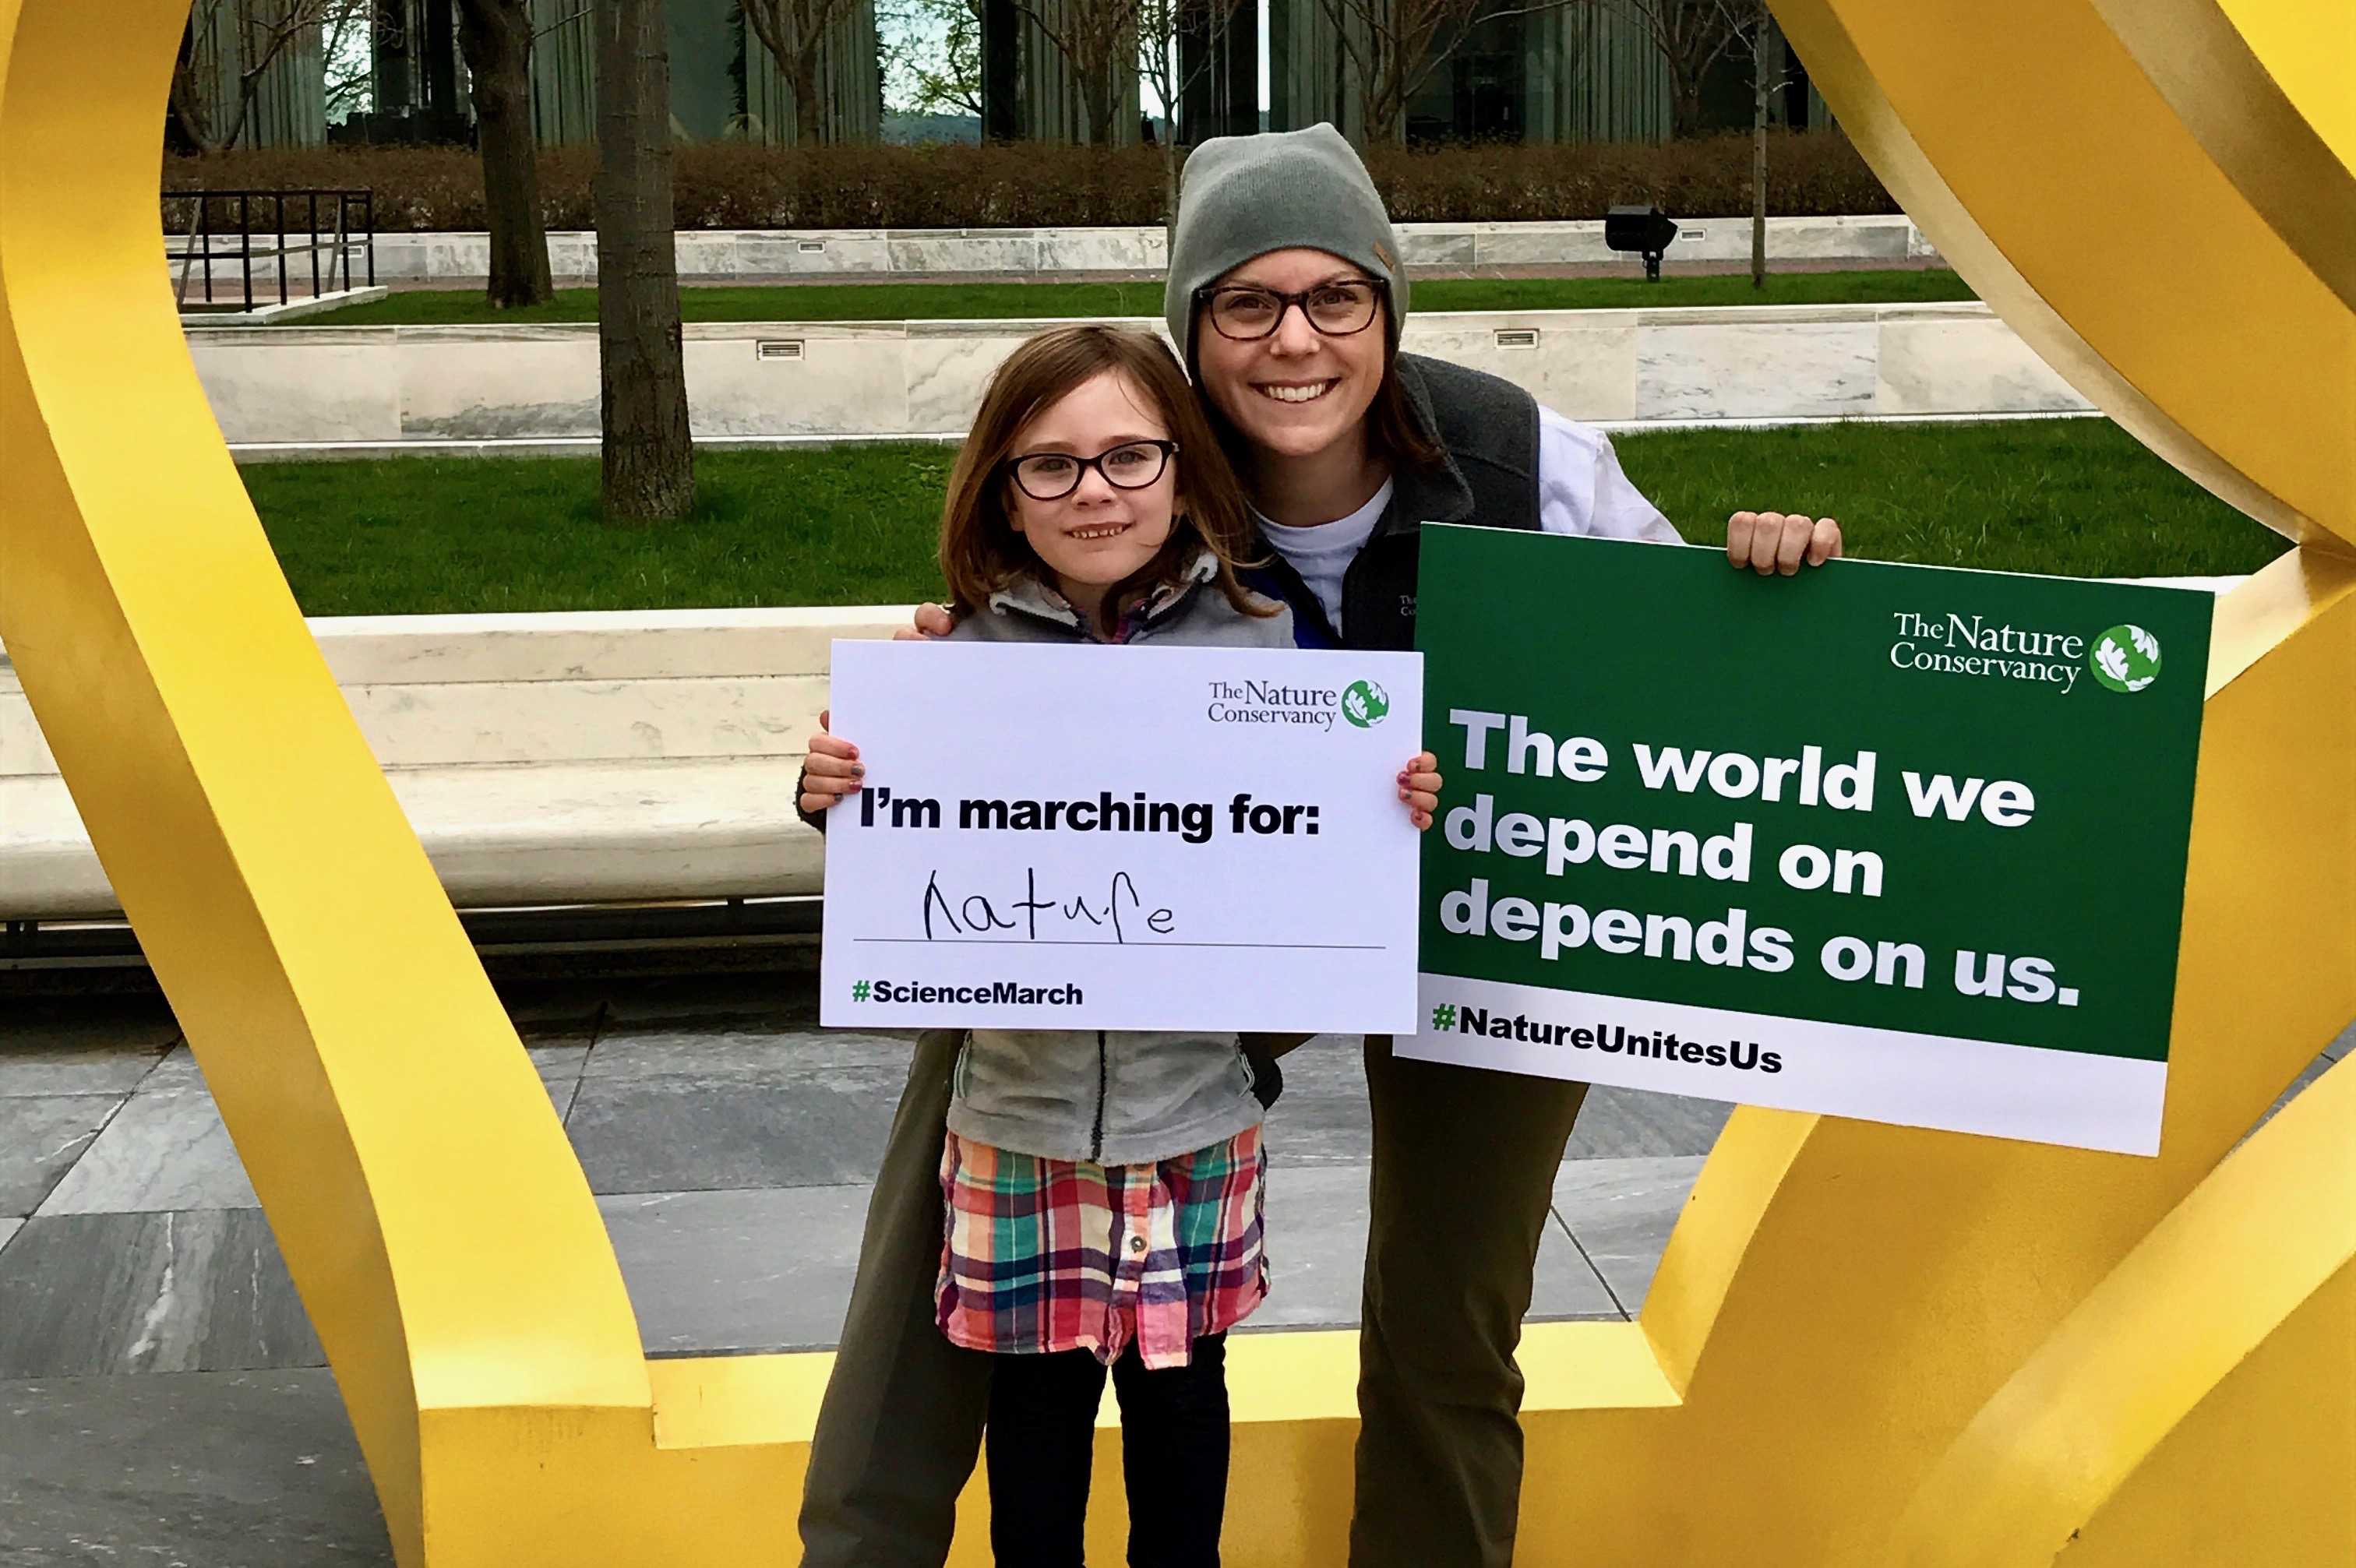 A woman at right with a sign in her hand saying "The world we depend on depends on us." next to a younger individual holding a sign saying "I'm marching for nature."